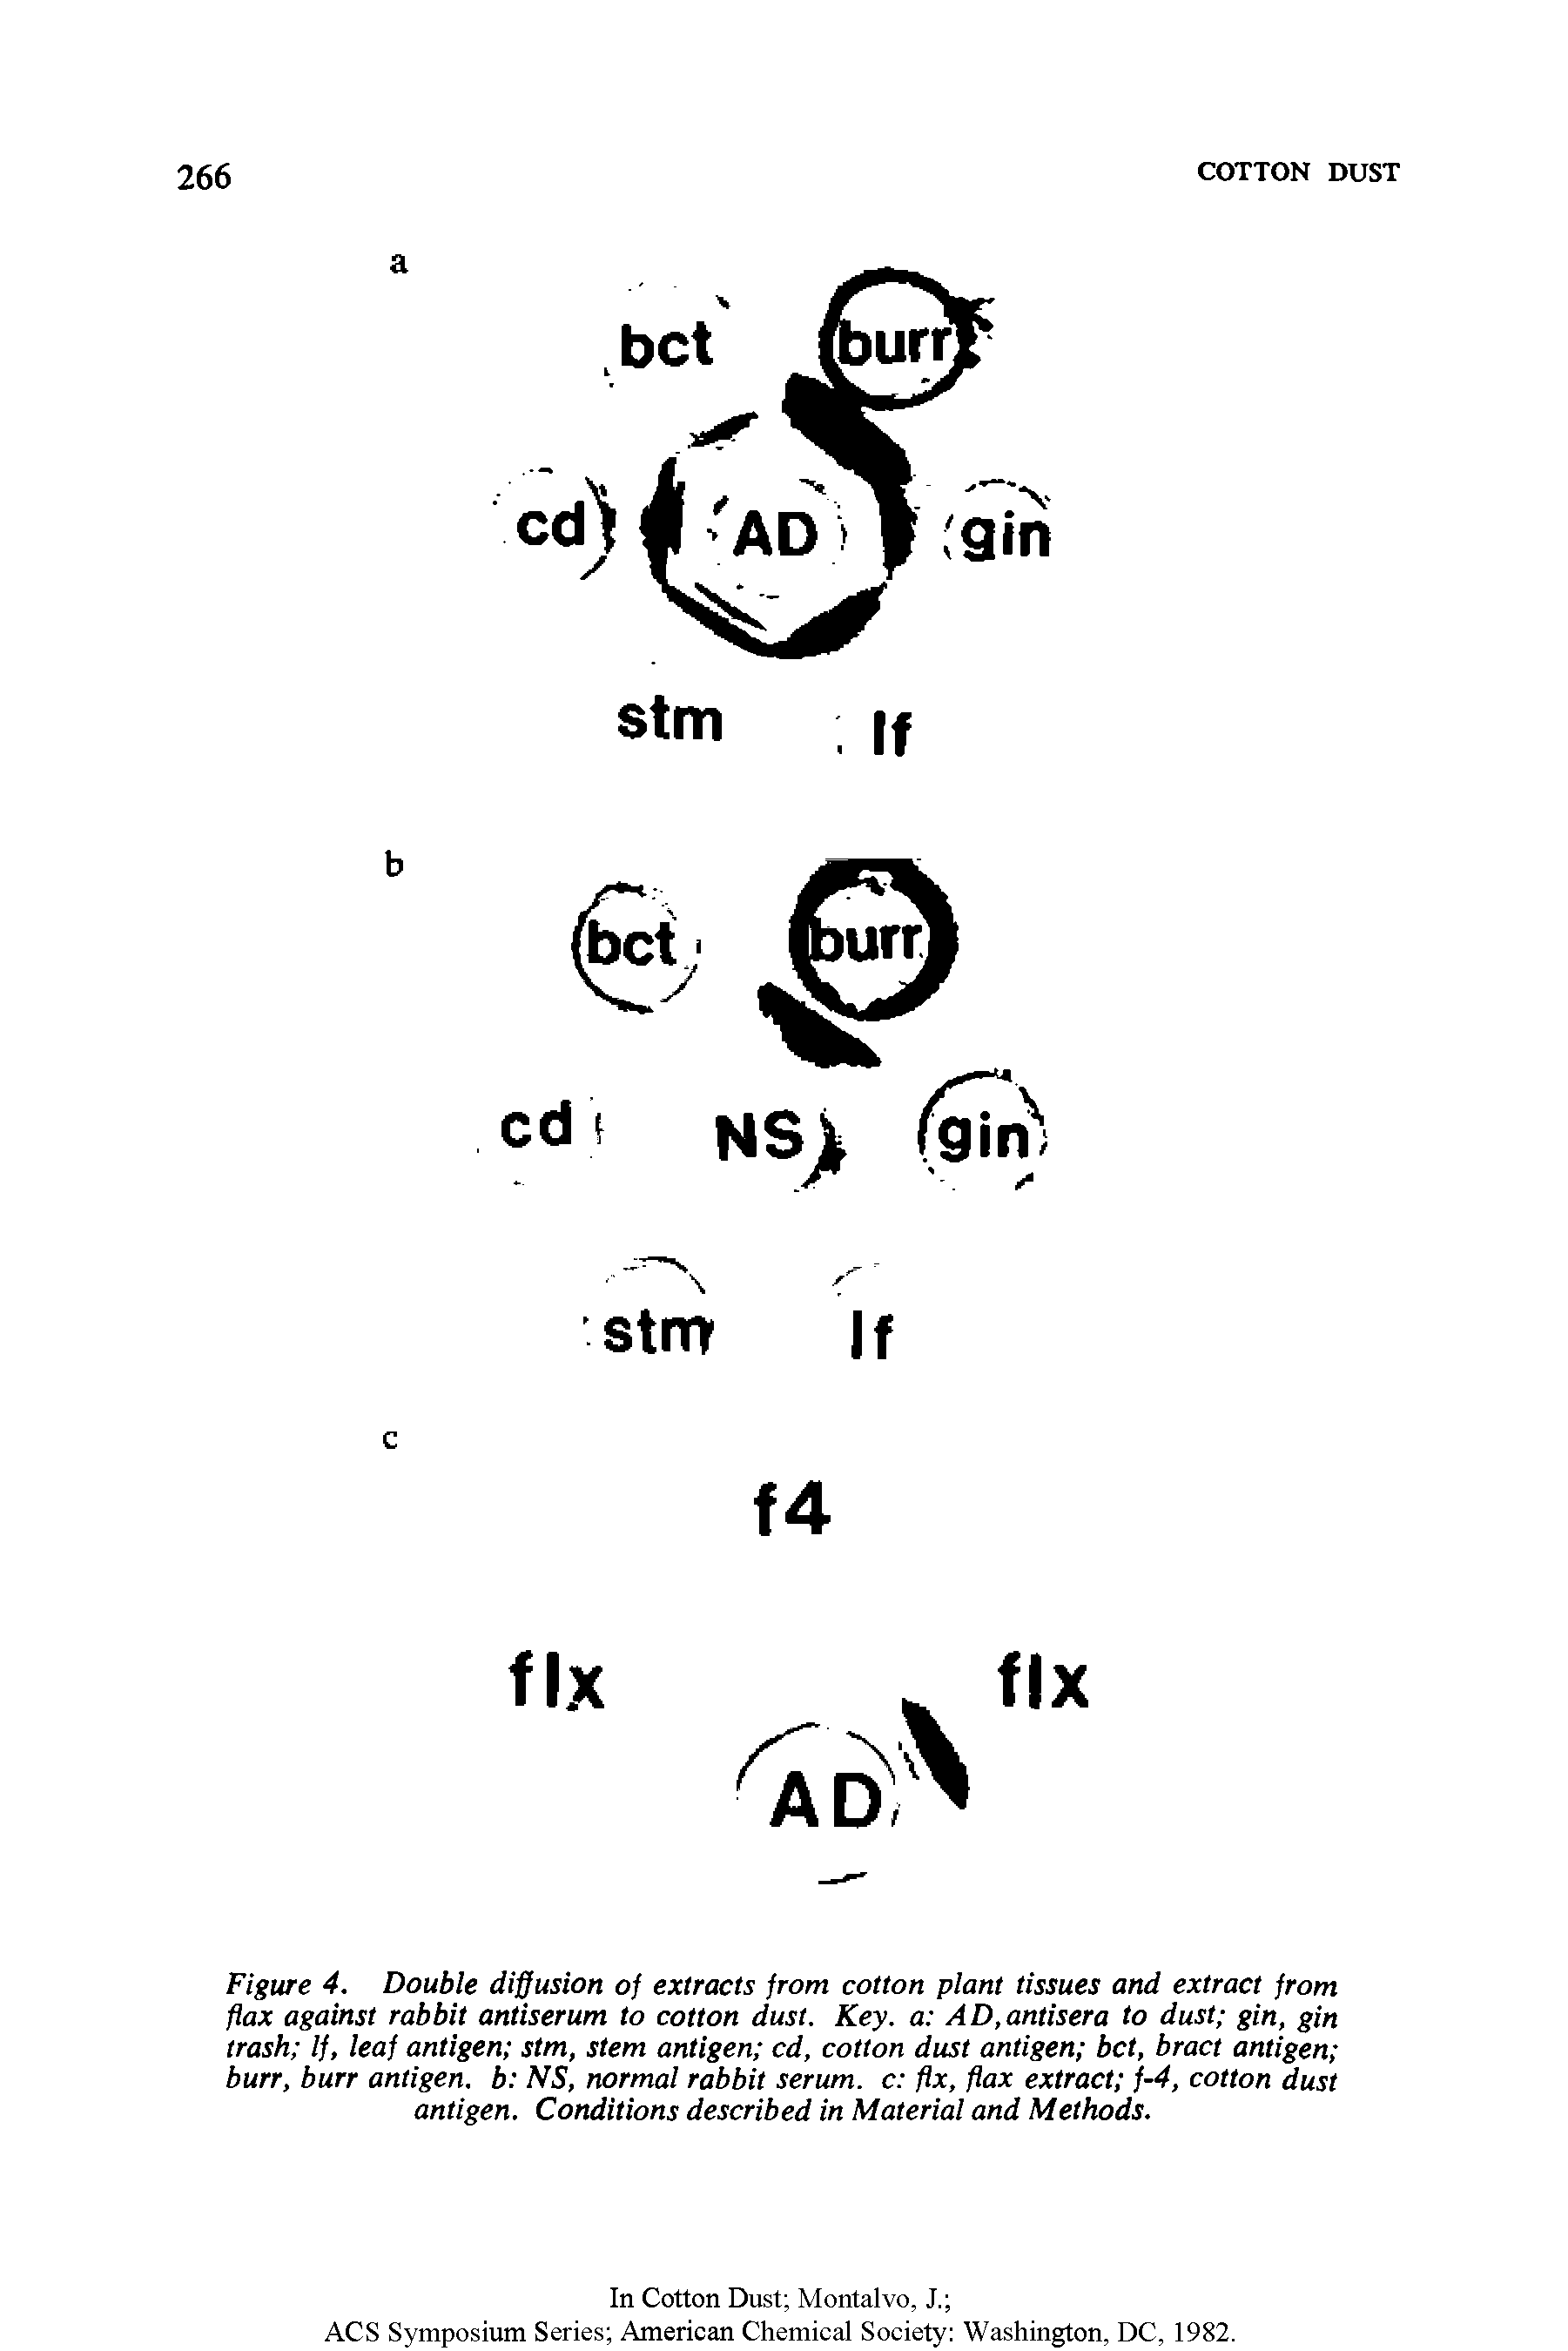 Figure 4. Double diffusion of extracts from cotton plant tissues and extract from flax against rabbit antiserum to cotton dust. Key. a AD,antisera to dust gin, gin trash If, leaf antigen stm, stem antigen cd, cotton dust antigen bet, bract antigen burr, burr antigen, b NS, normal rabbit serum, c fix, flax extract f-4, cotton dust antigen. Conditions described in Material and Methods.